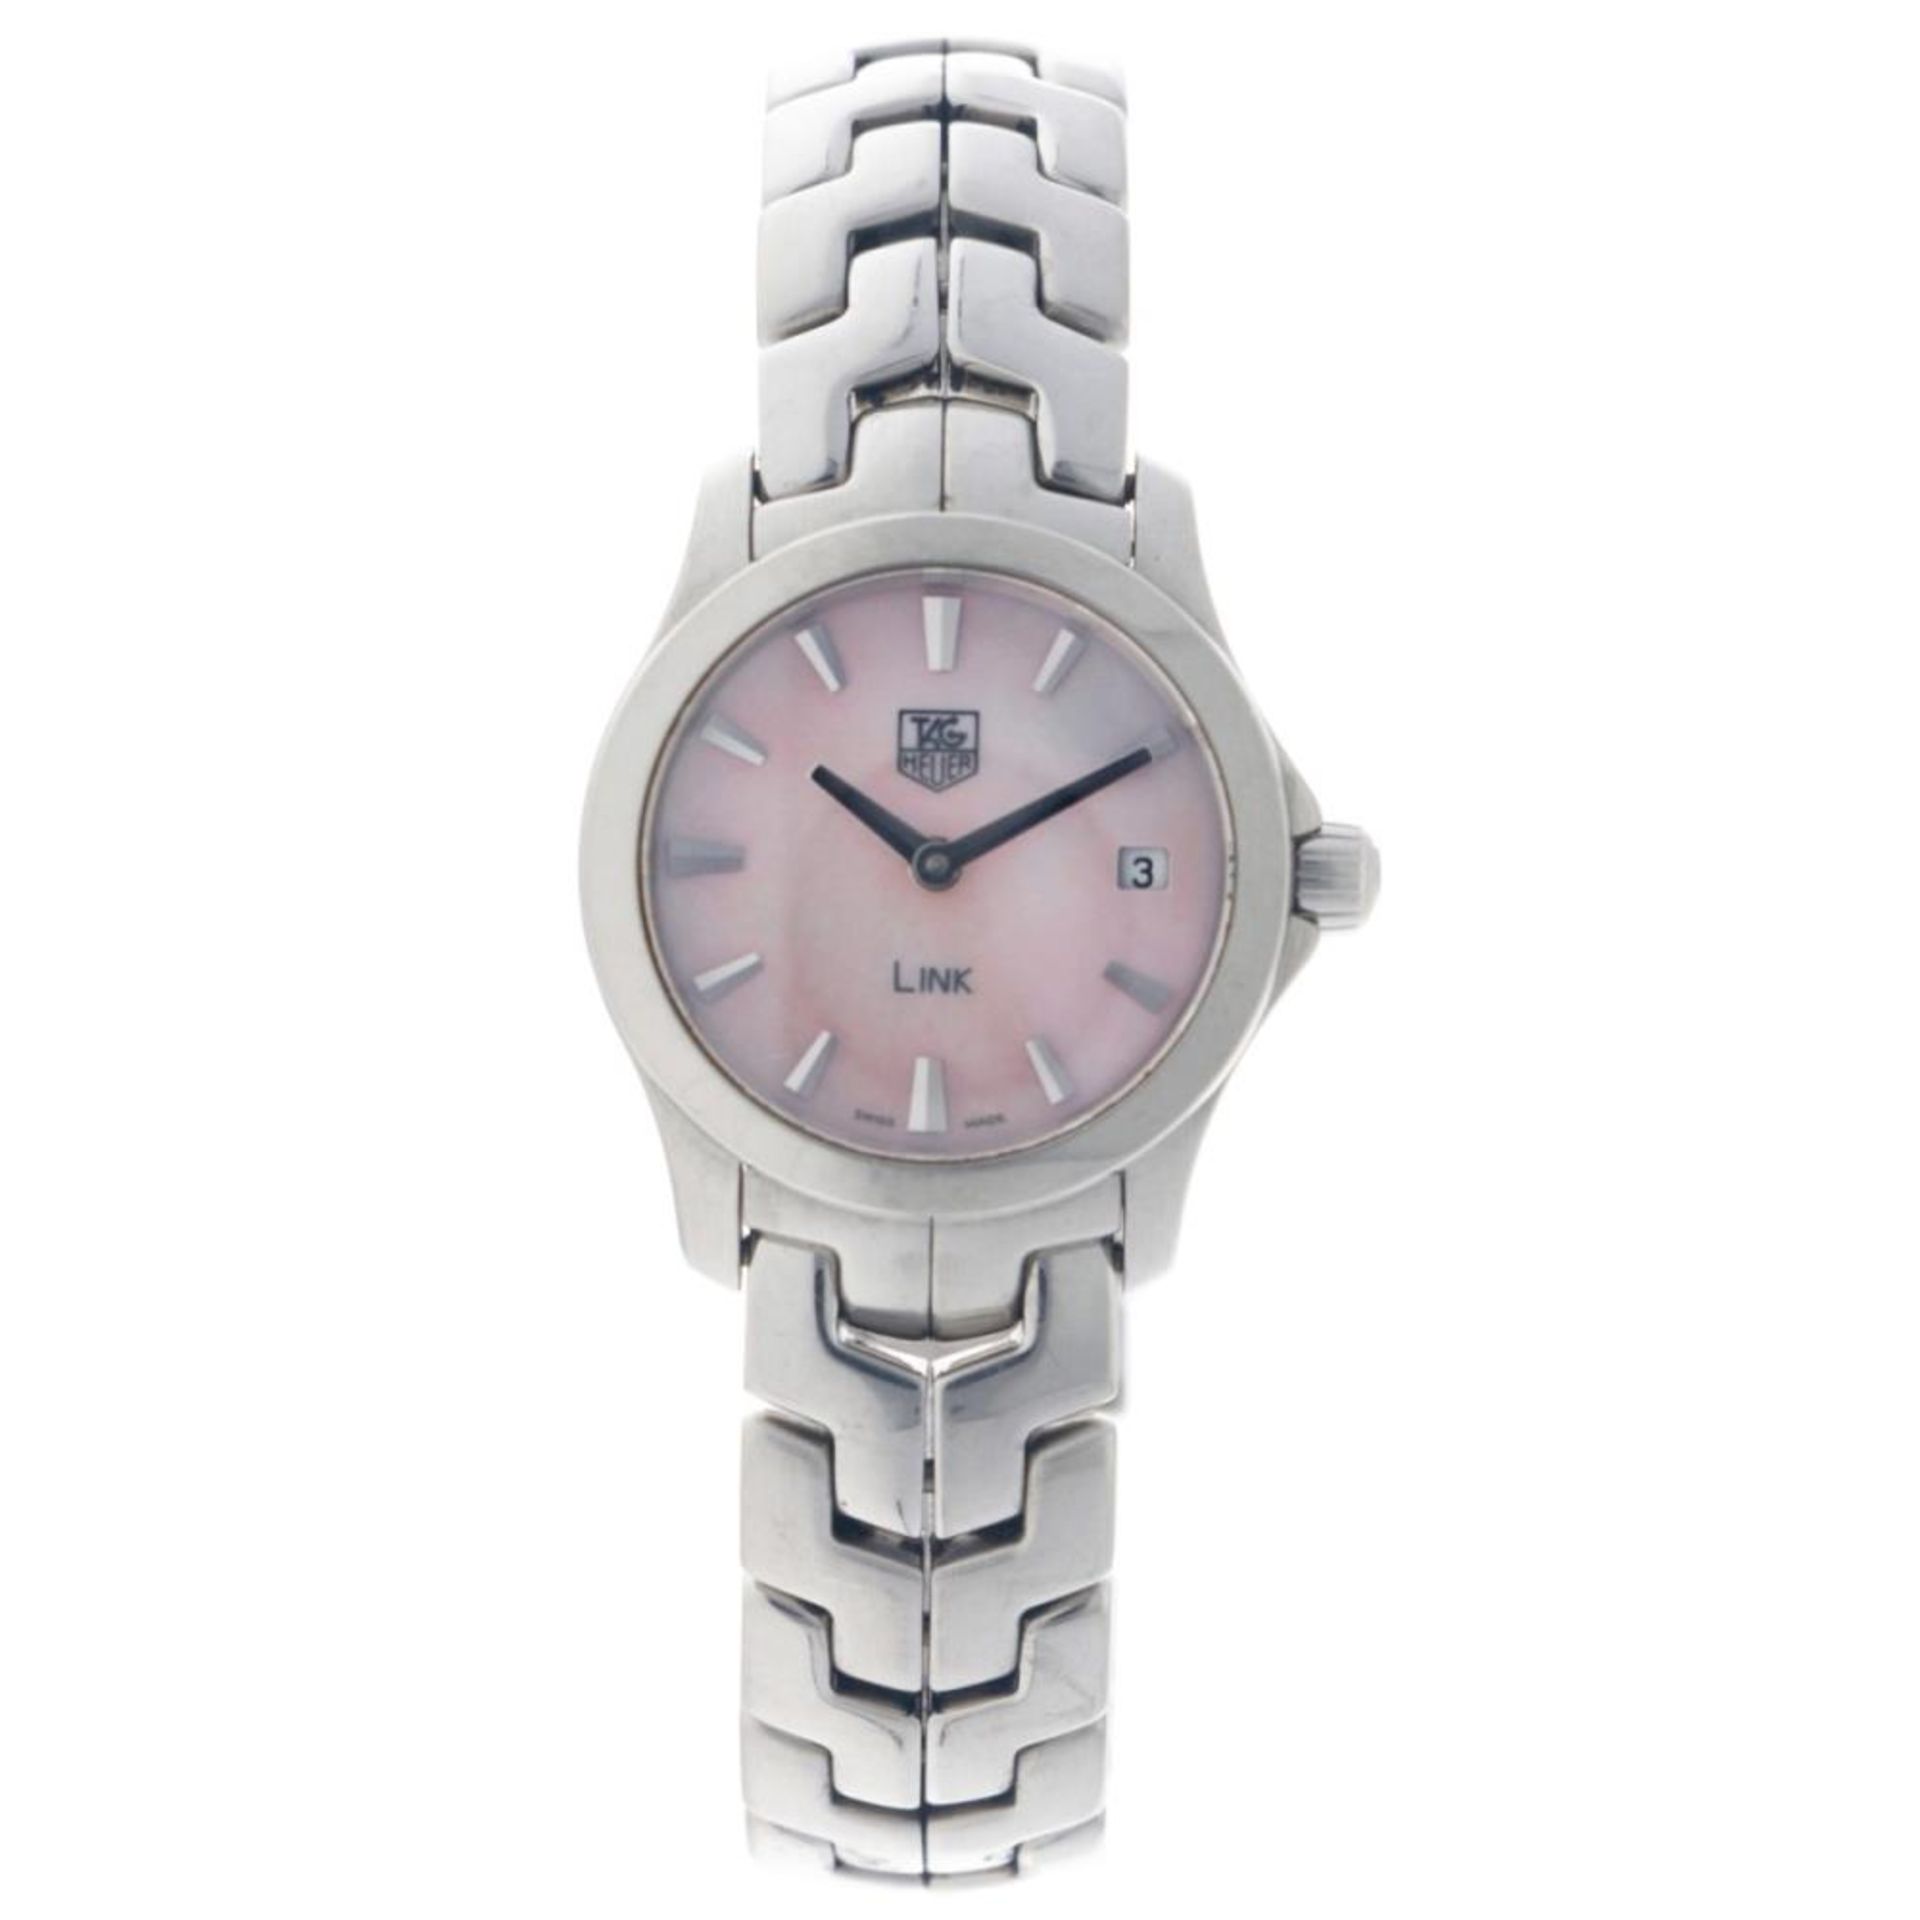 TAG Heuer Link WJF1412 - Pink Mother of Pearl - Ladies watch - approx. 2013. - Image 2 of 10